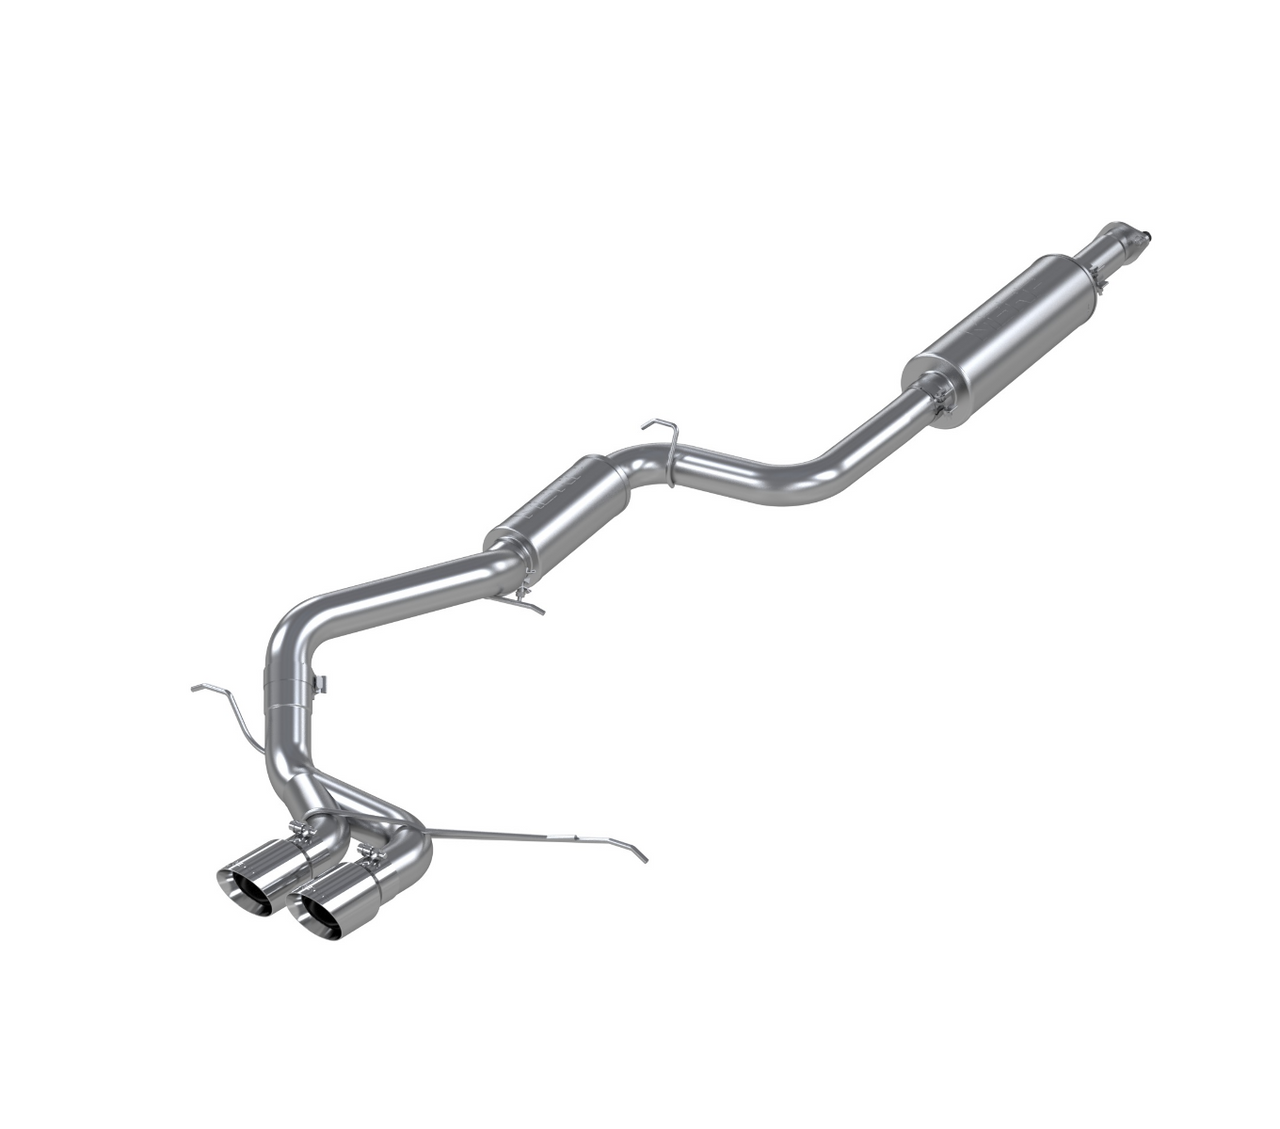 MBRP S4200304 T304 Stainless Steel Exhaust for 13-18 Ford Focus ST 2.0L Ecoboost